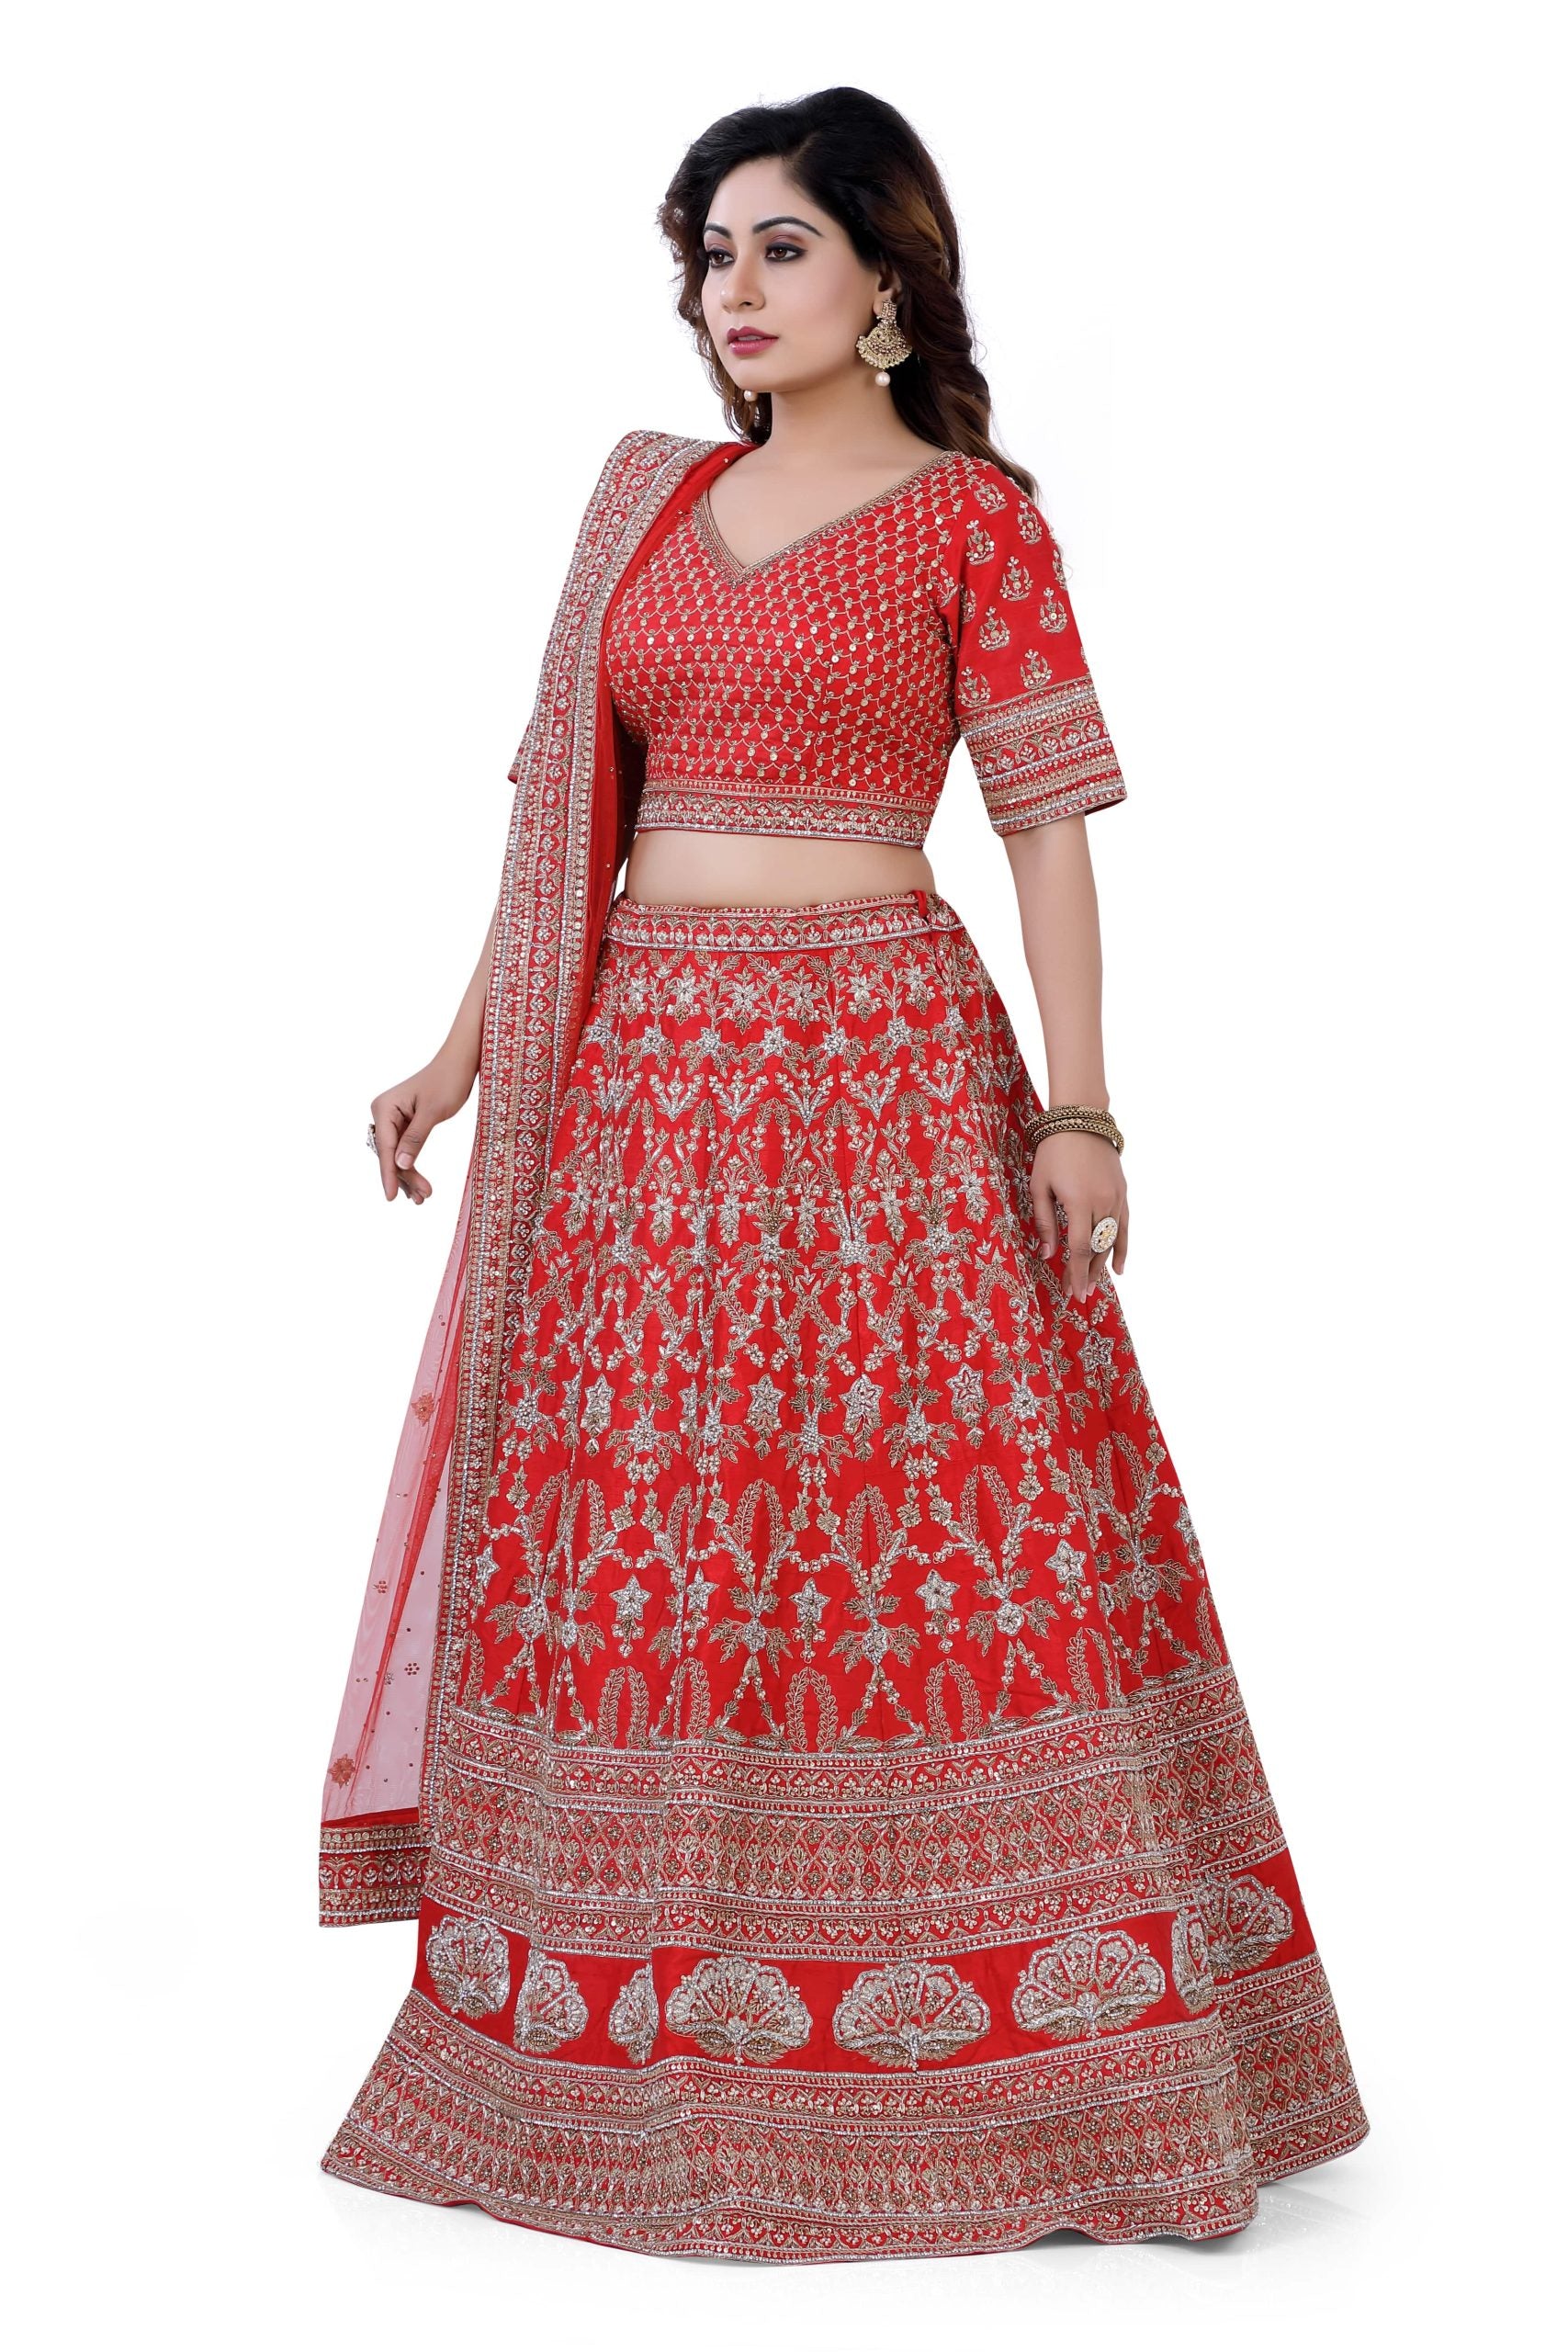 Bridal Lehenga Choli in Red Color with Heavy  Hand embroidery